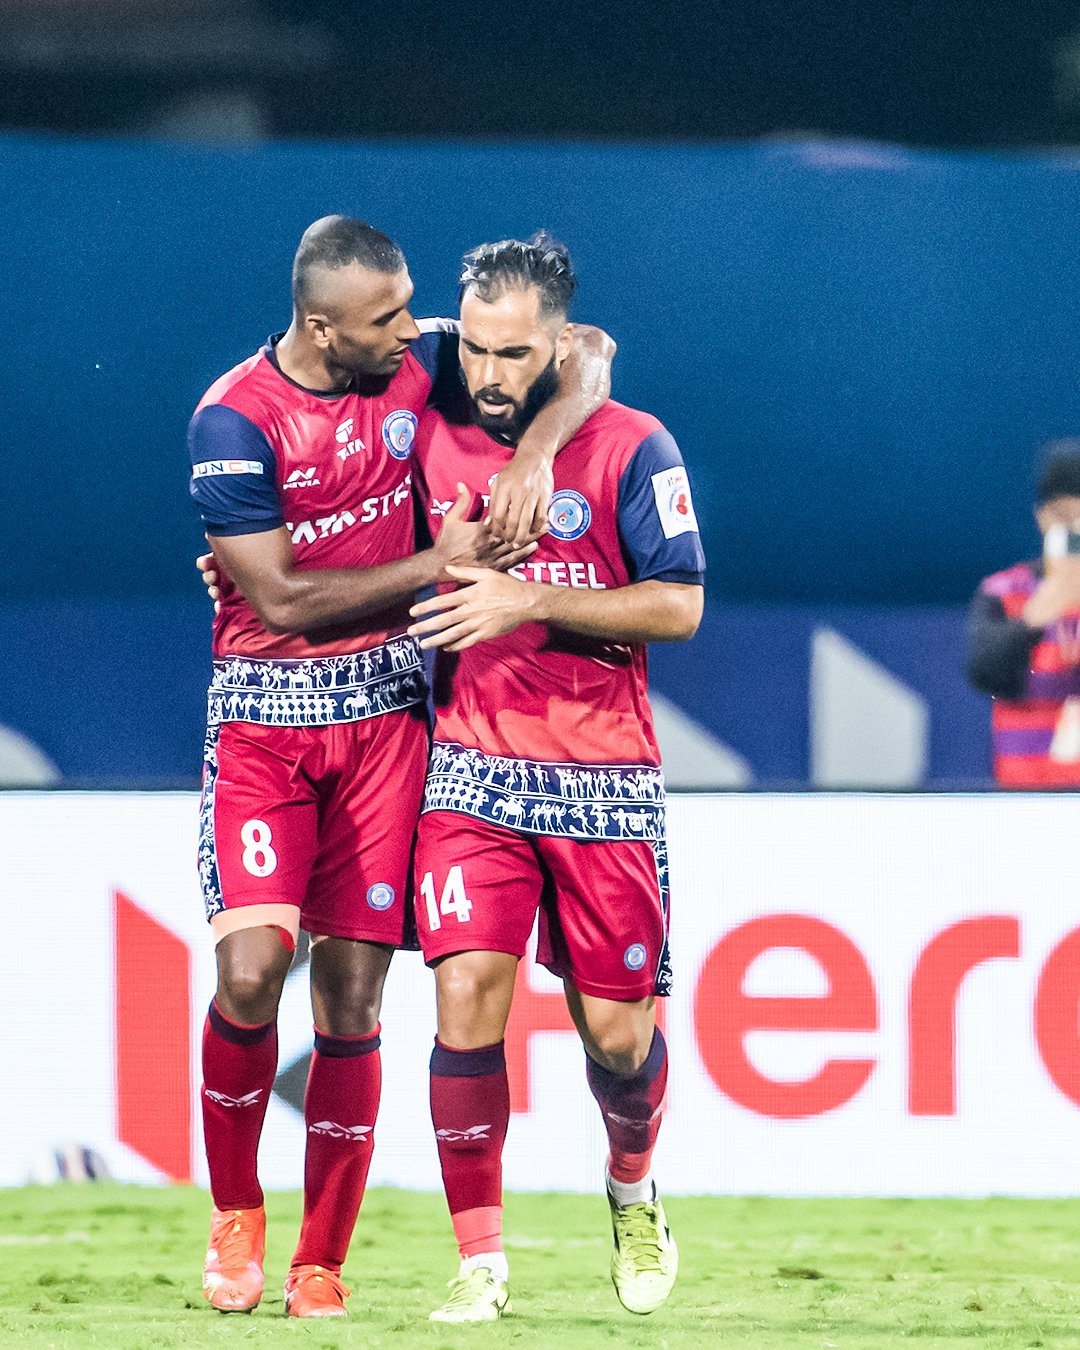 ISL 2021-22 | Jamshedpur FC make it to the semis after 3-0 win over Hyderabad FC